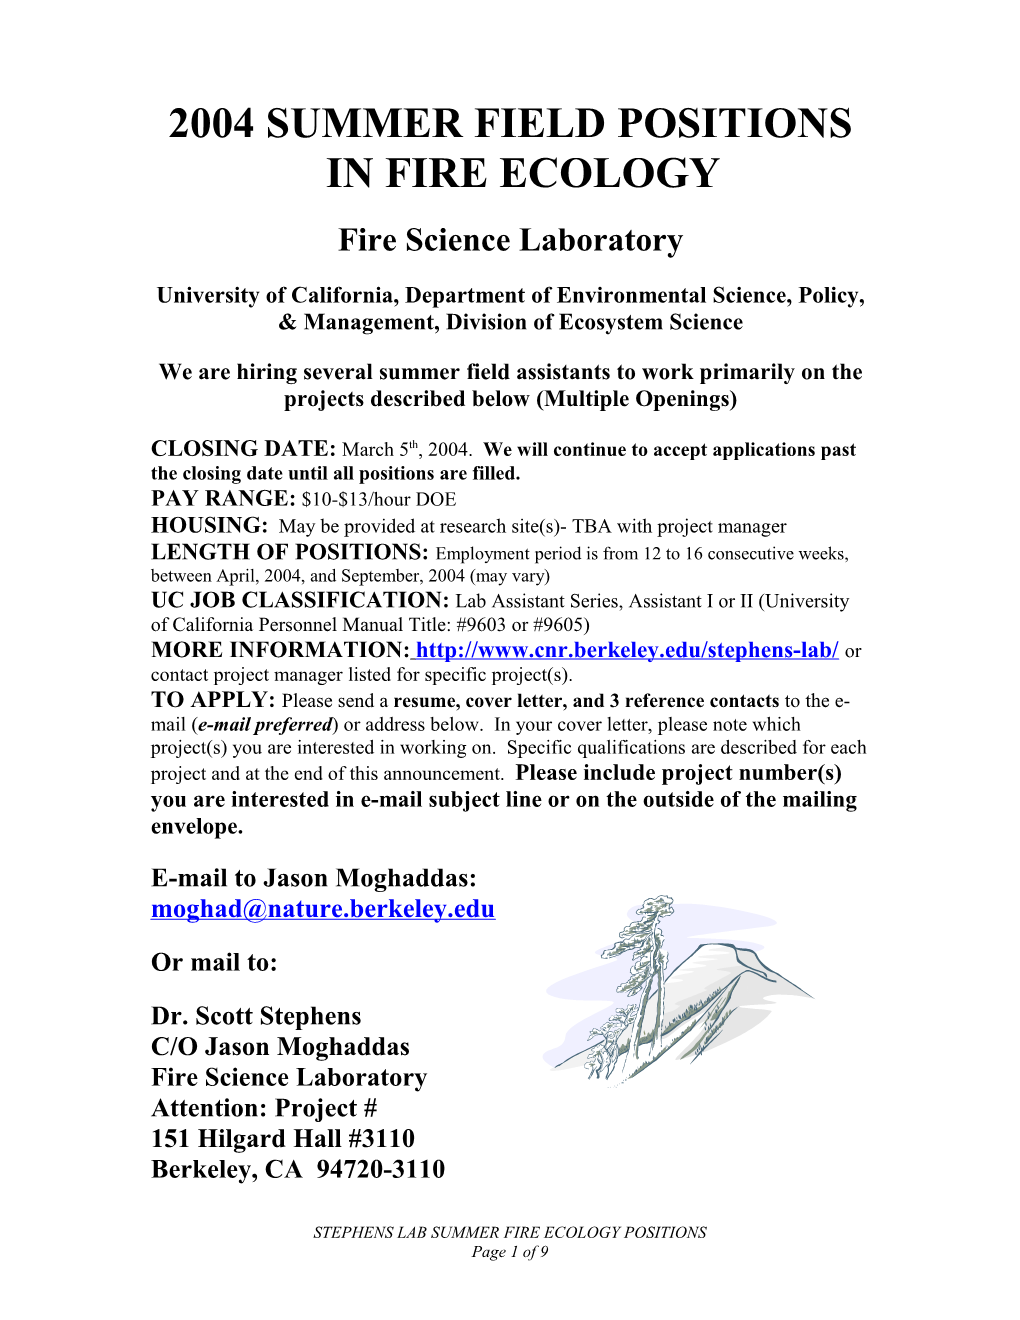 Summer Field Positions in Fire Ecology